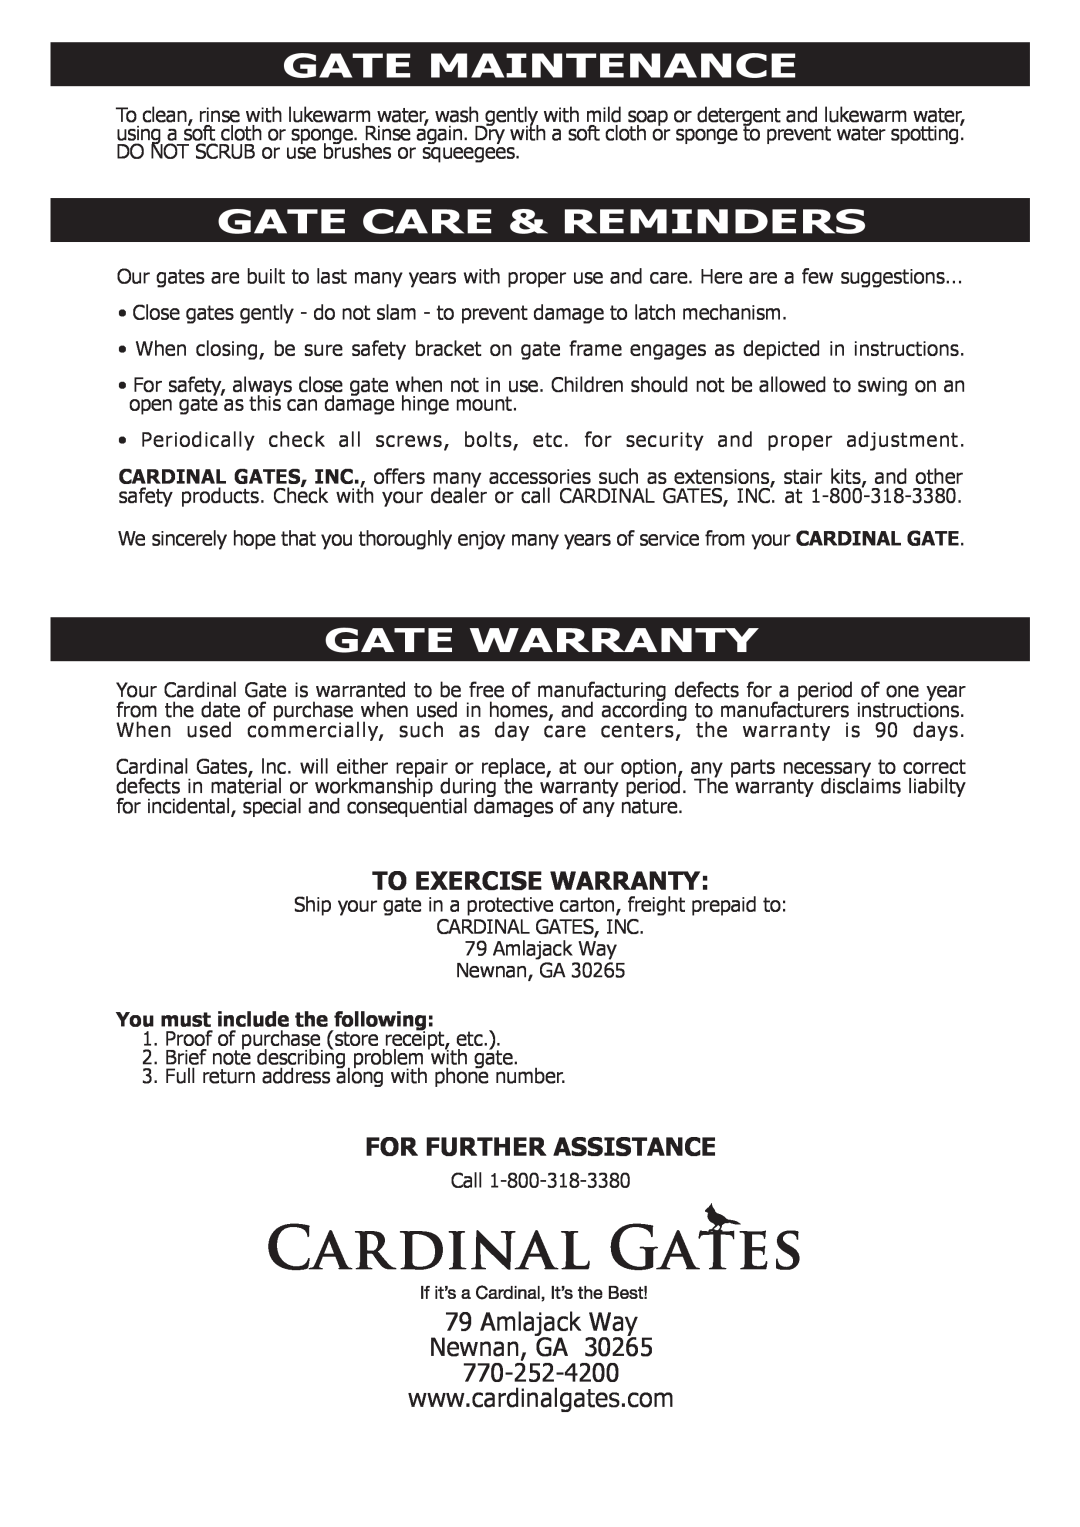 Cardinal Gates PG-35 manual Gate Maintenance, Gate Care & Reminders, Gate Warranty, You must include the following 